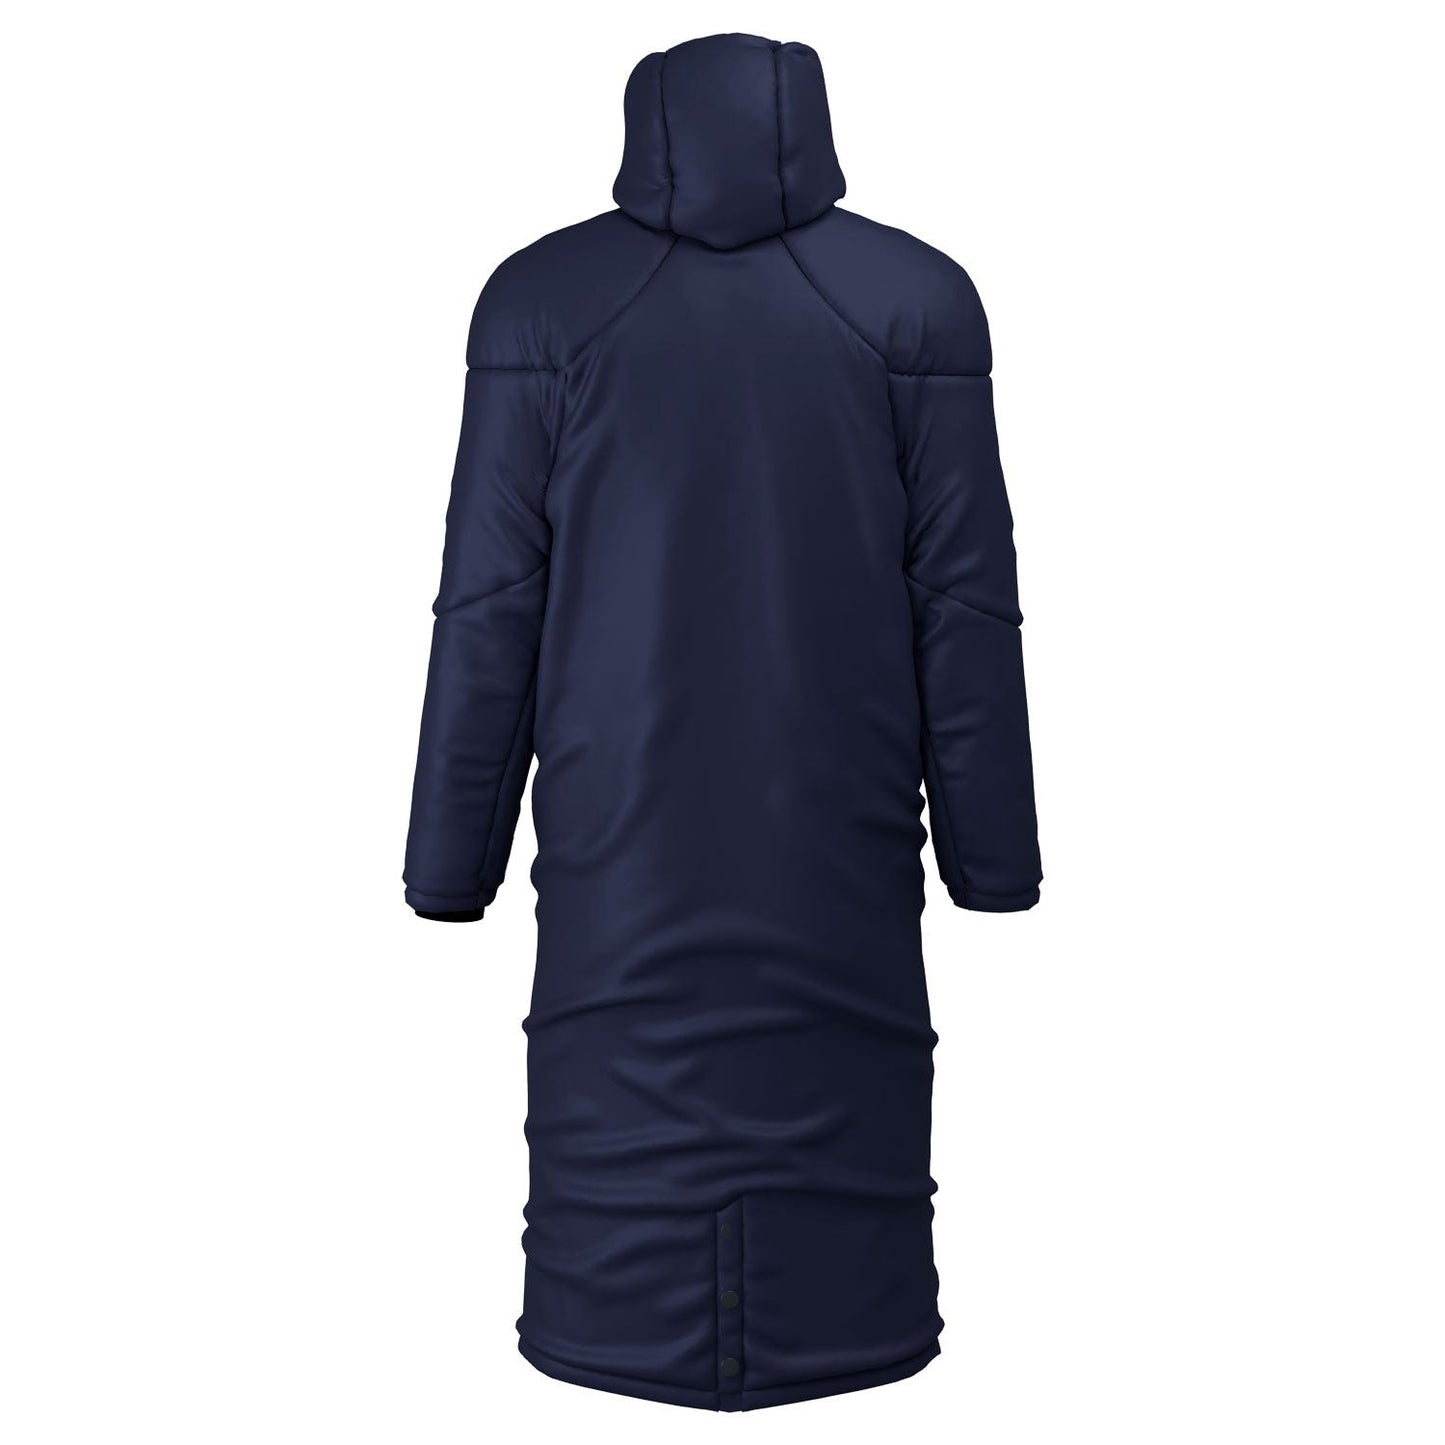 Said Business School Rowing Club Contoured Thermal Sub Coat